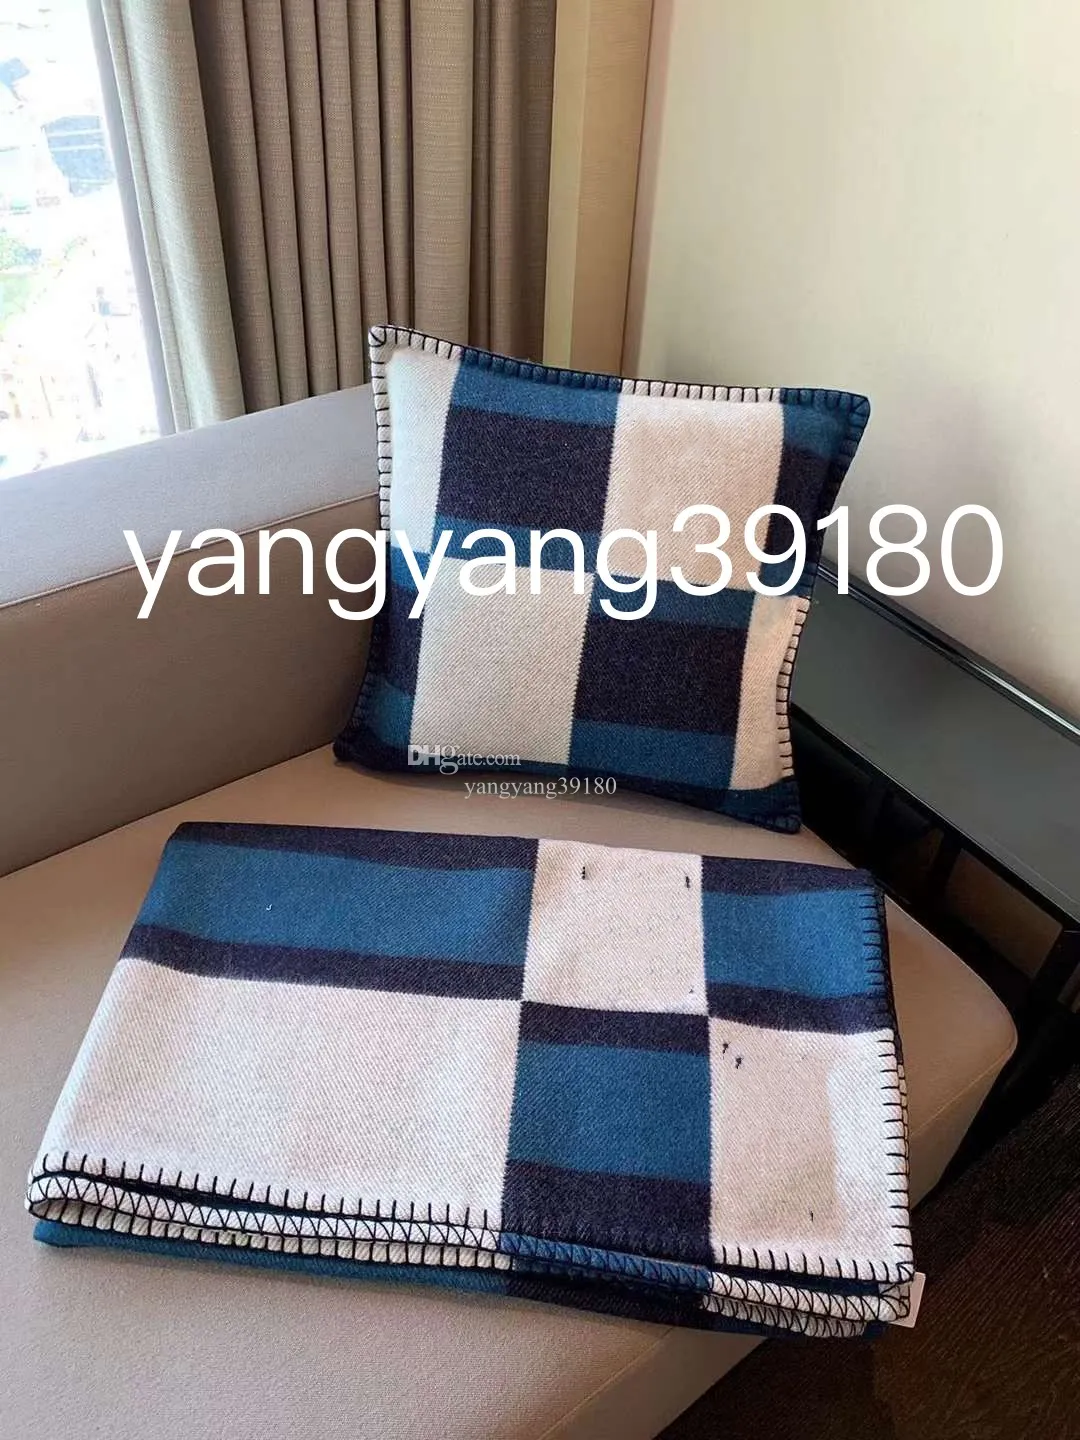 Same As Shop 1500G Have Dust Bag Nevy H Blankets Designer and Cushion H Blanket WOOL Thick Home Sofa Good Quailty 130&170cm TOP Selling Big Size Wool lot colors